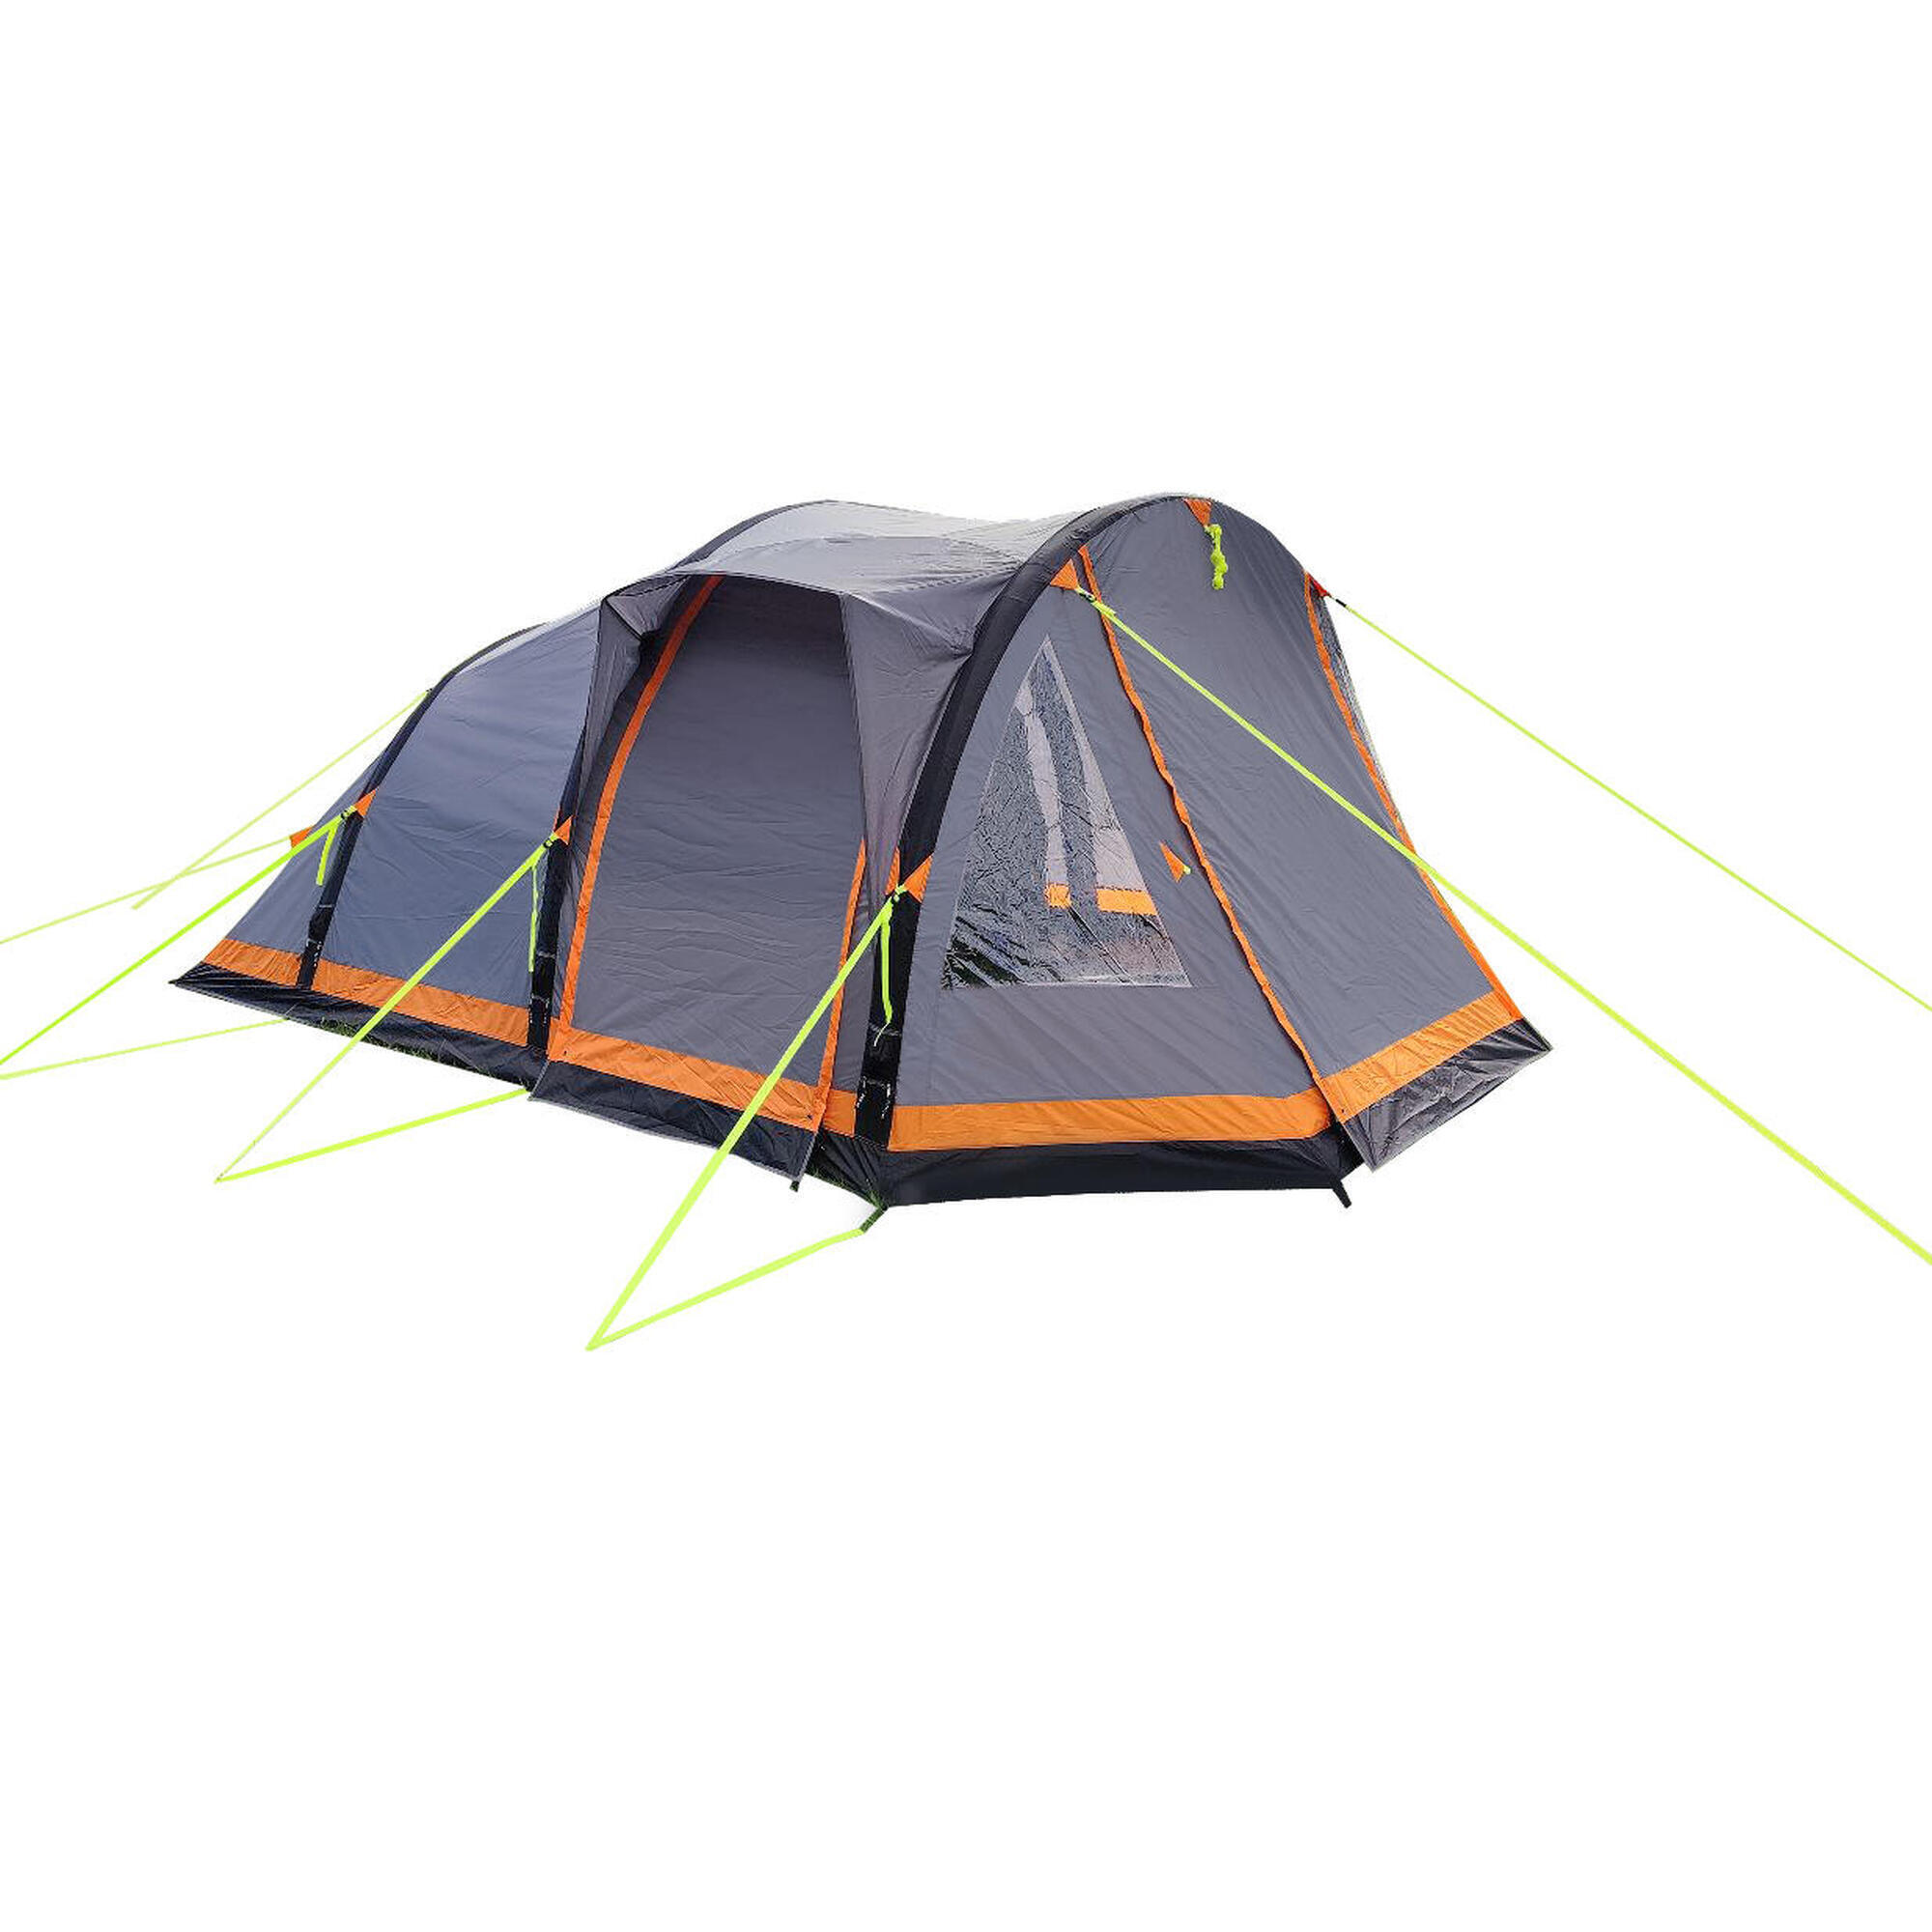 OLPRO OLPRO Abberley XL Breeze 4 Berth Inflatable Tent